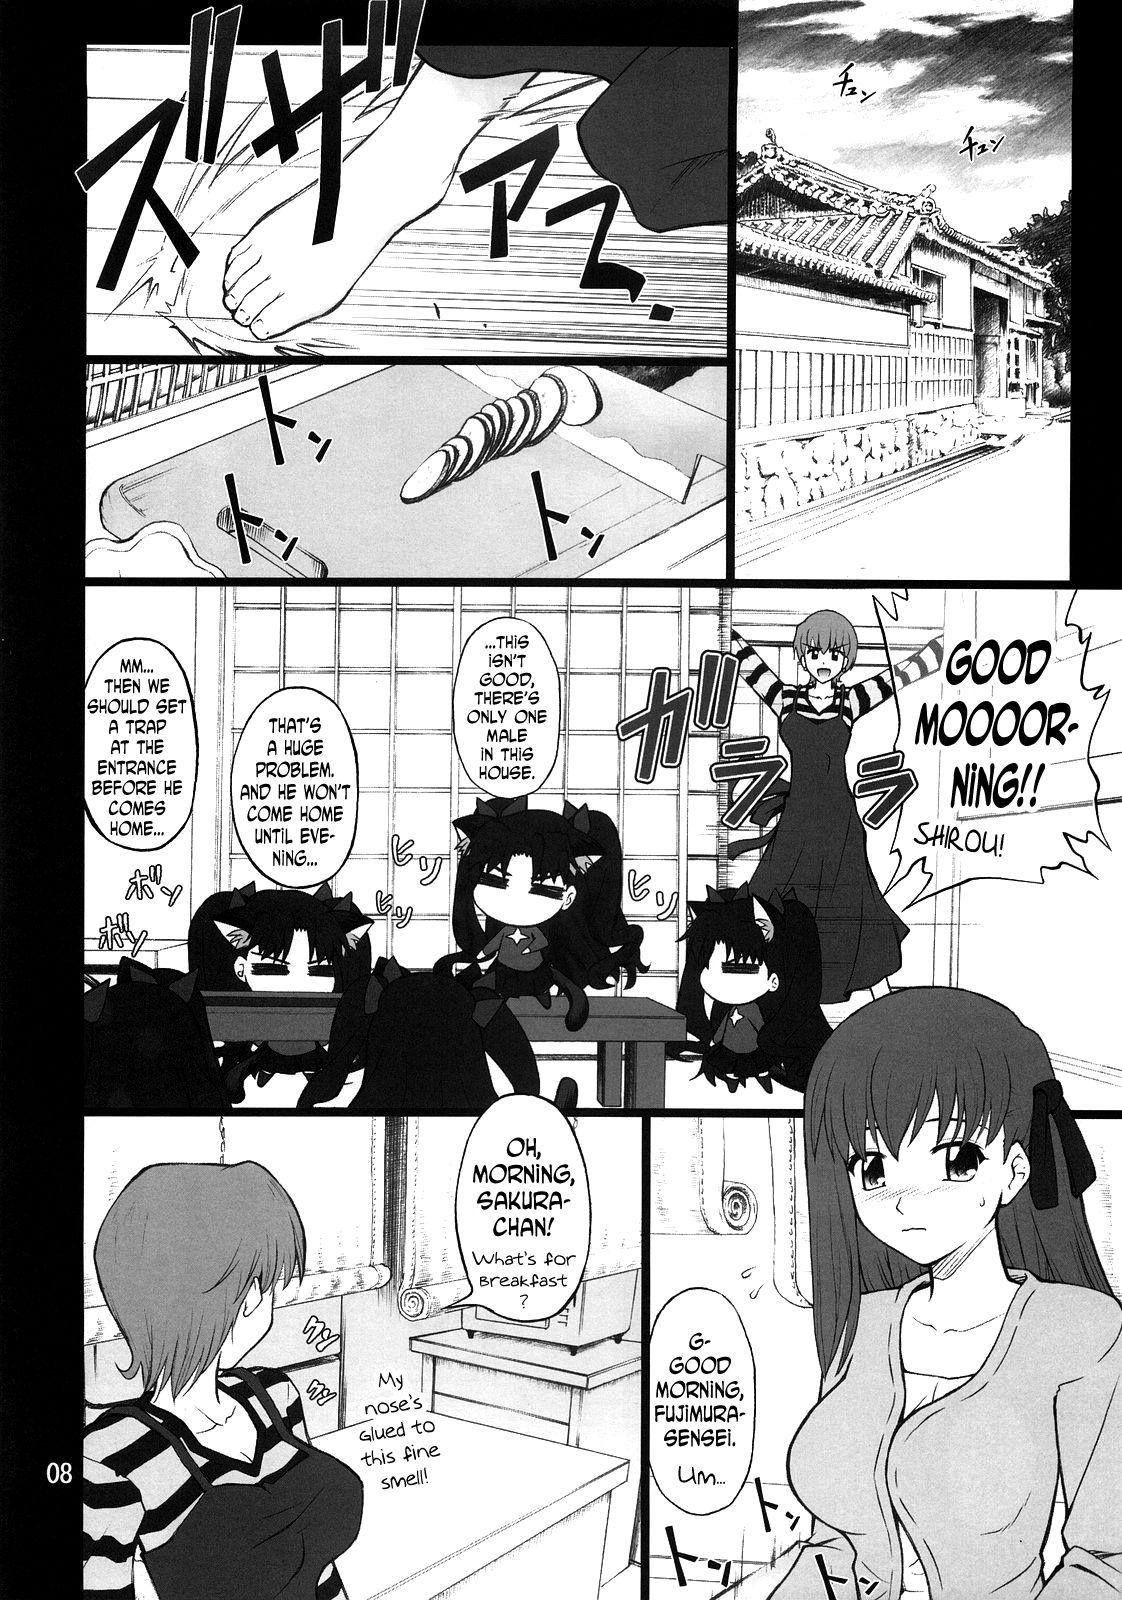 Virgin Grem-Rin 2 - Fate stay night Wetpussy - Page 7